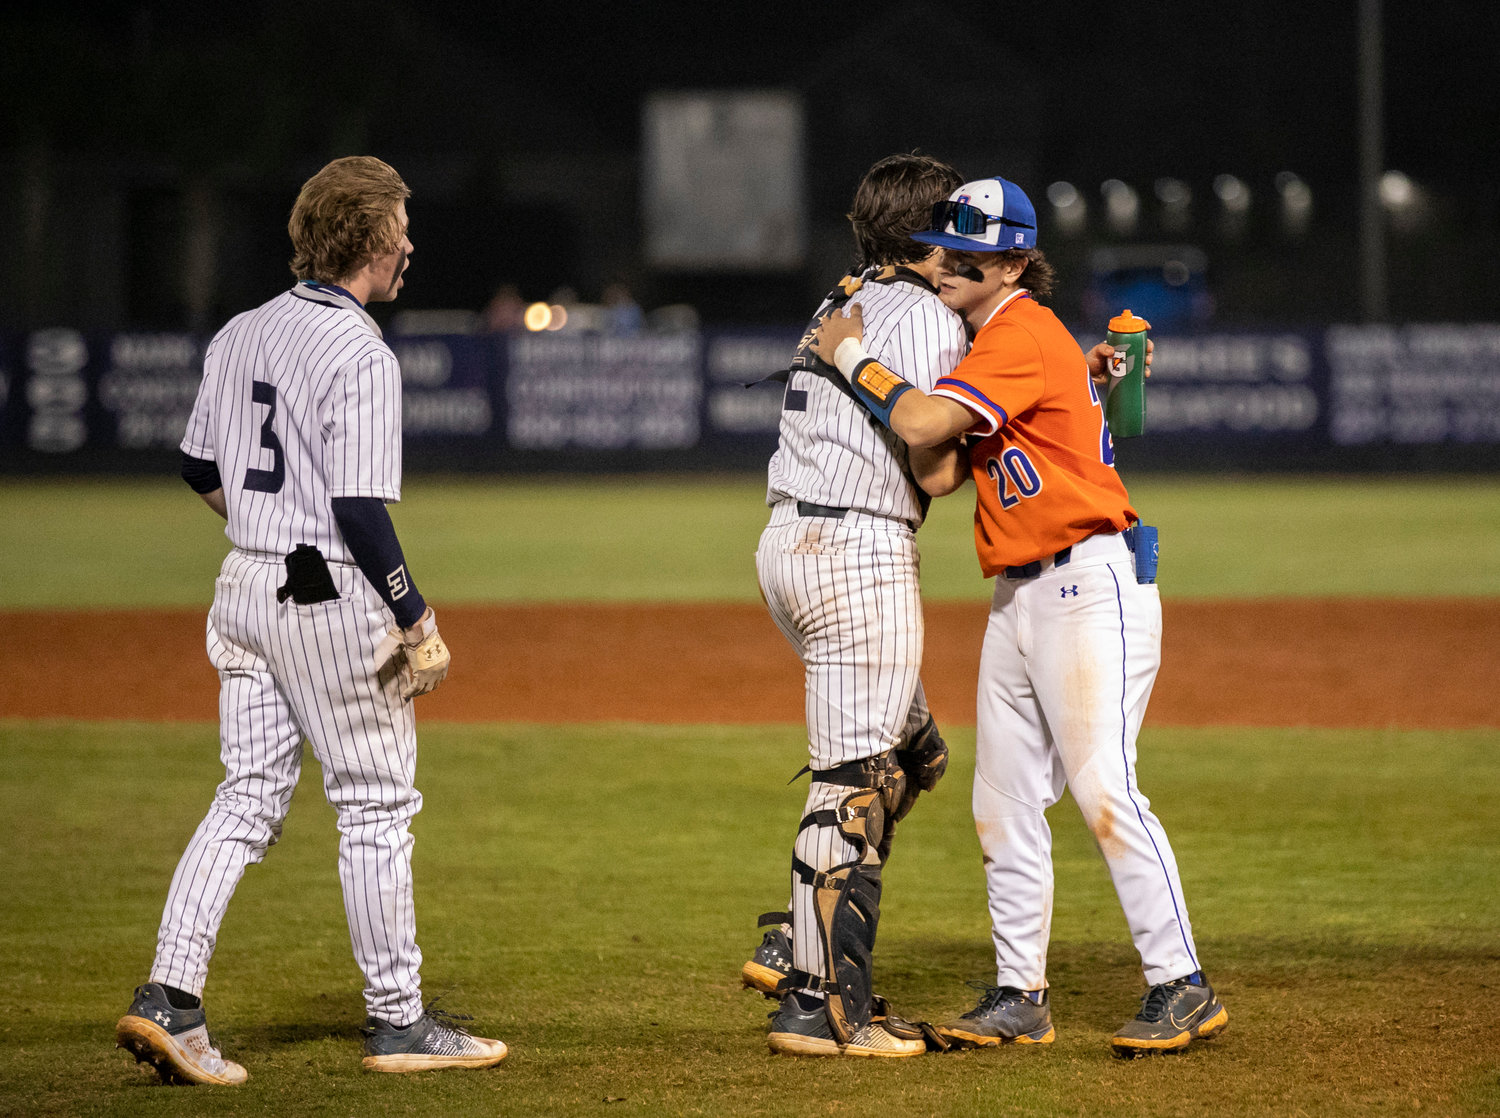 Gulf Shores’ Dom Maldet (2) and Orange Beach’s Tucker West (20) share an embrace after the first-ever baseball game between the Dolphins and Makos at the Gulf Shores Sportsplex Friday night, Feb. 24, as part of Prep Baseball Report’s South Alabama Showdown. The host Dolphins won 10-0.